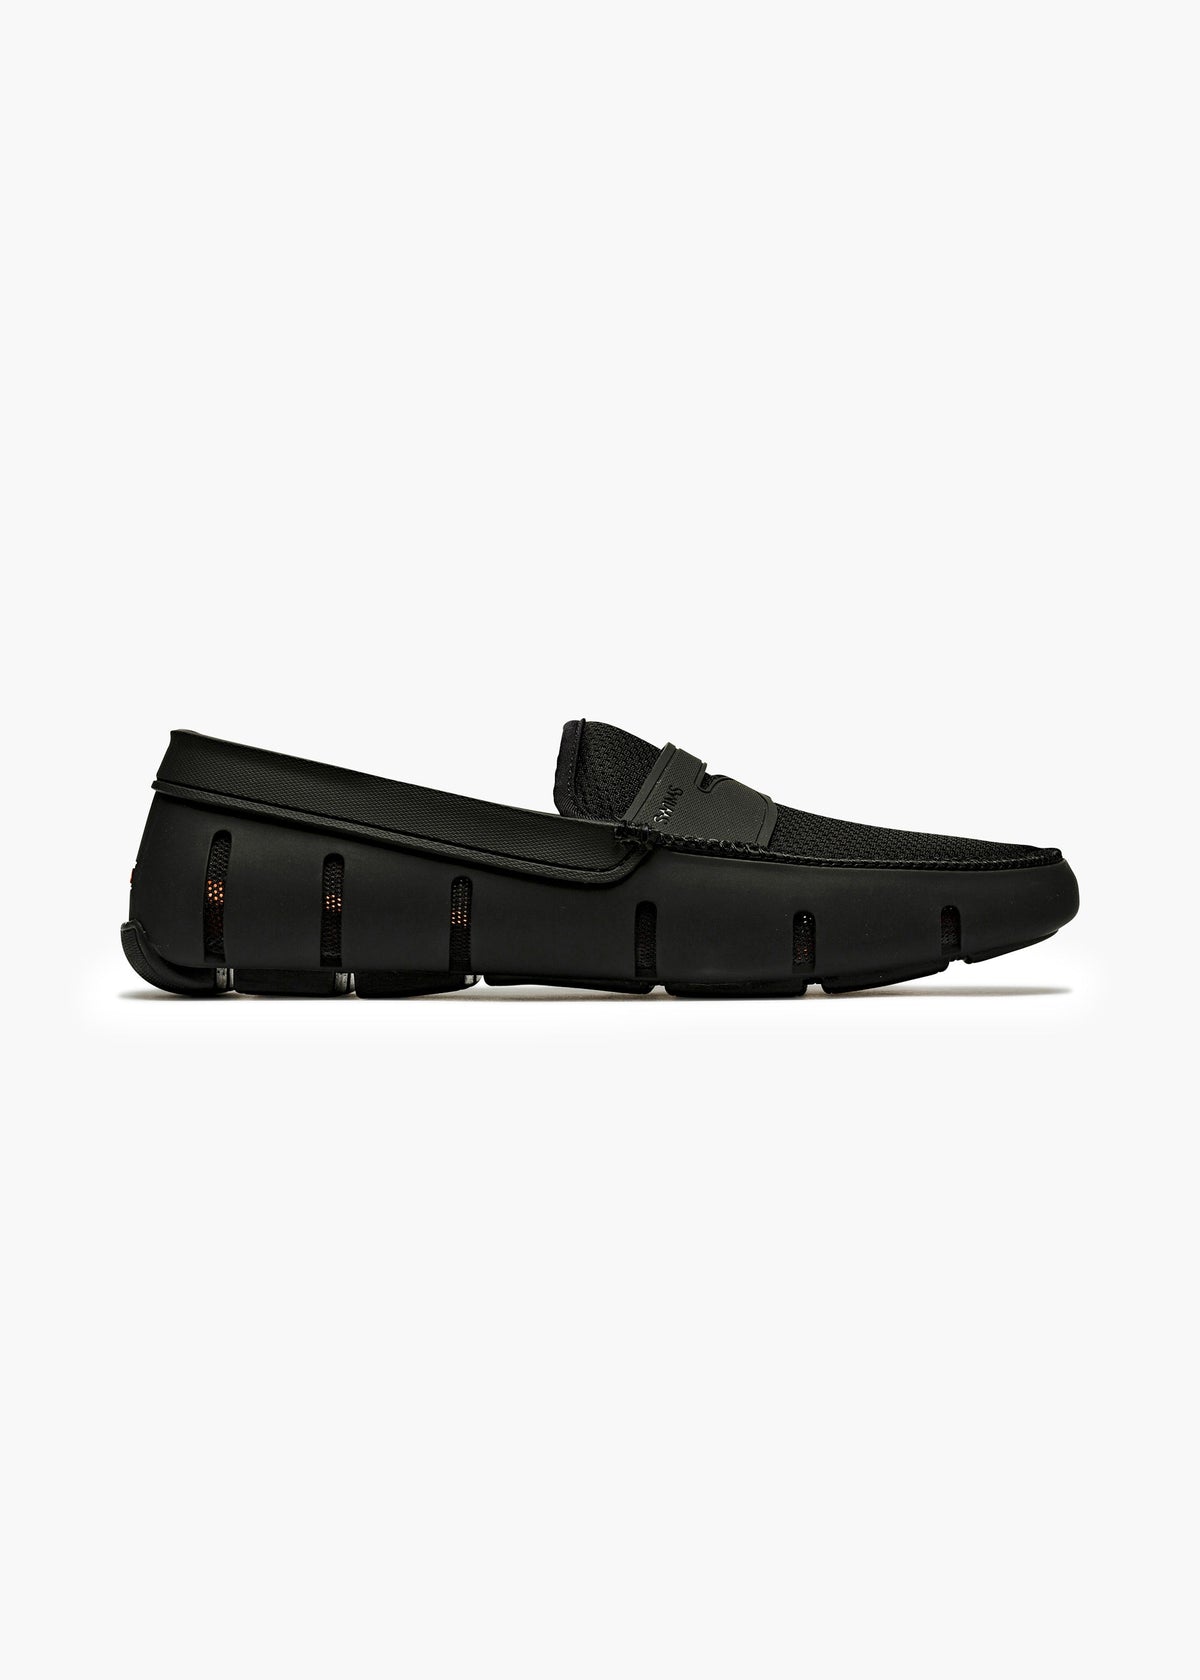 Penny Loafer | SWIMS